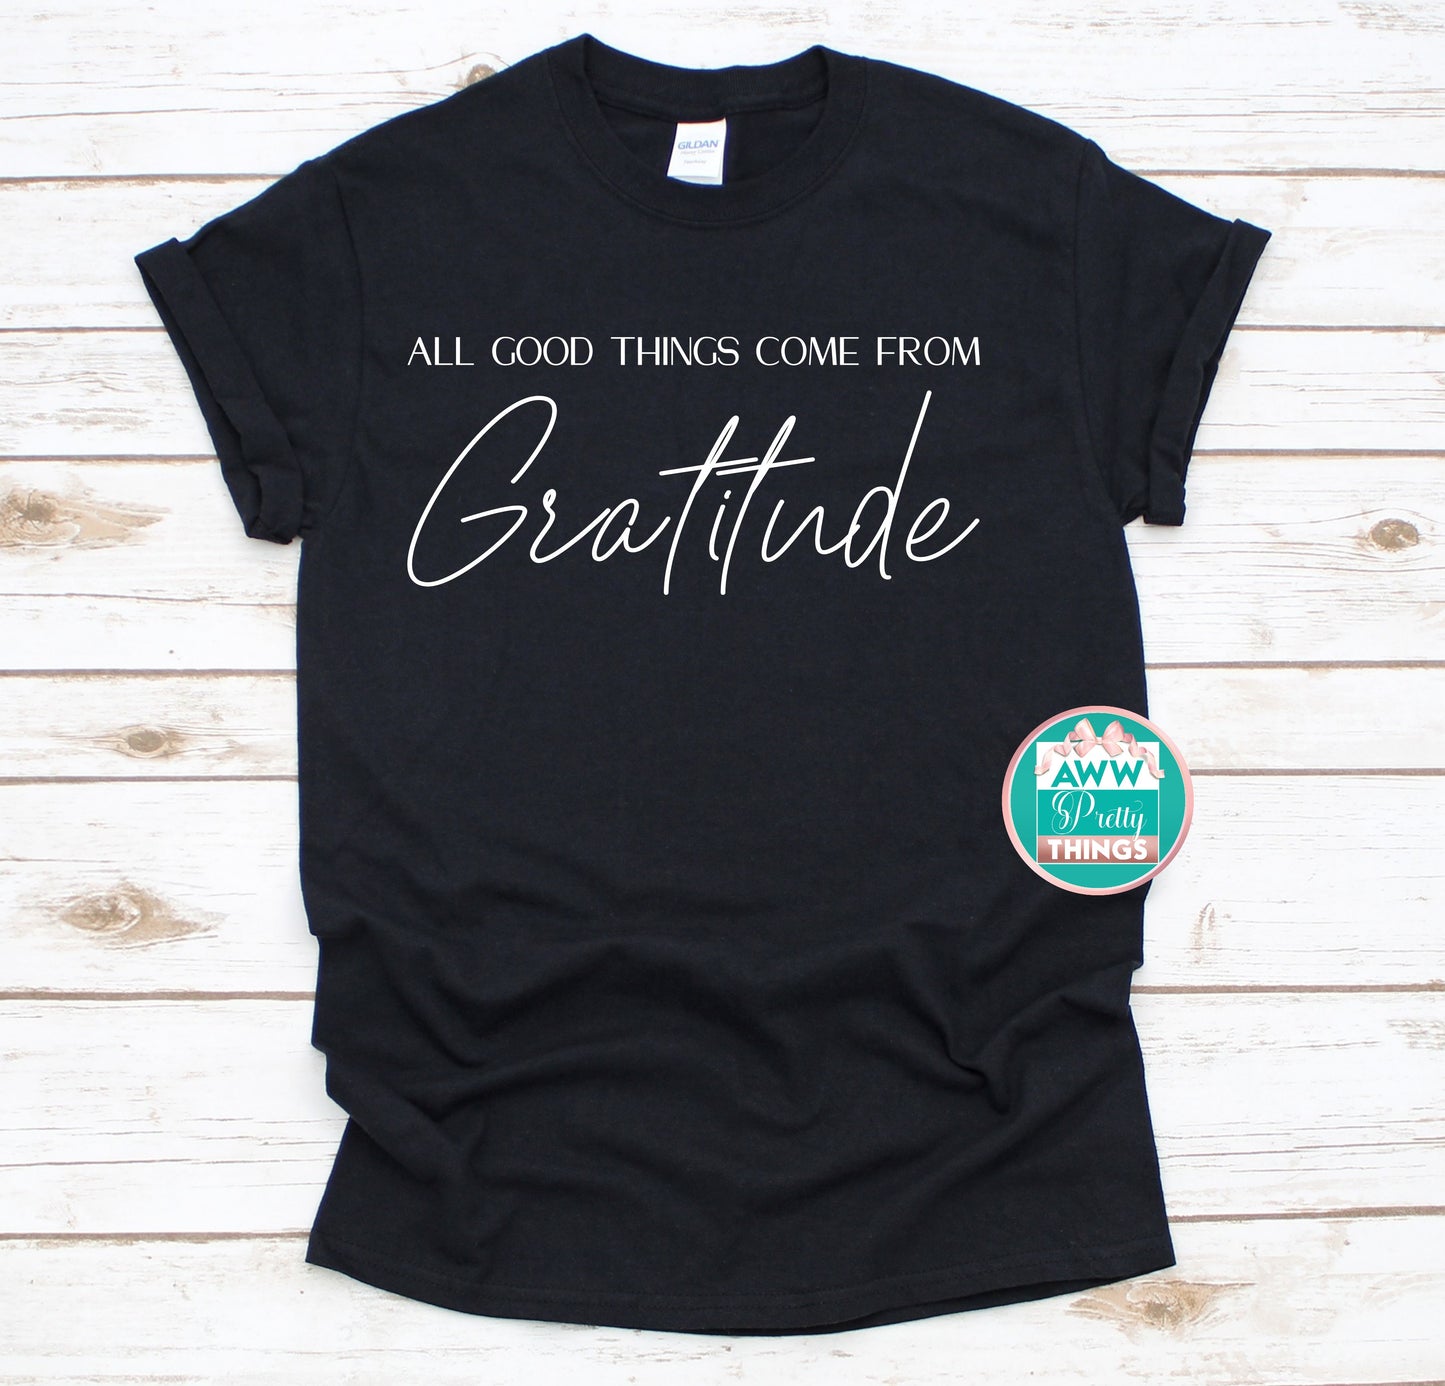 All Good Things Come From Gratitude Shirt